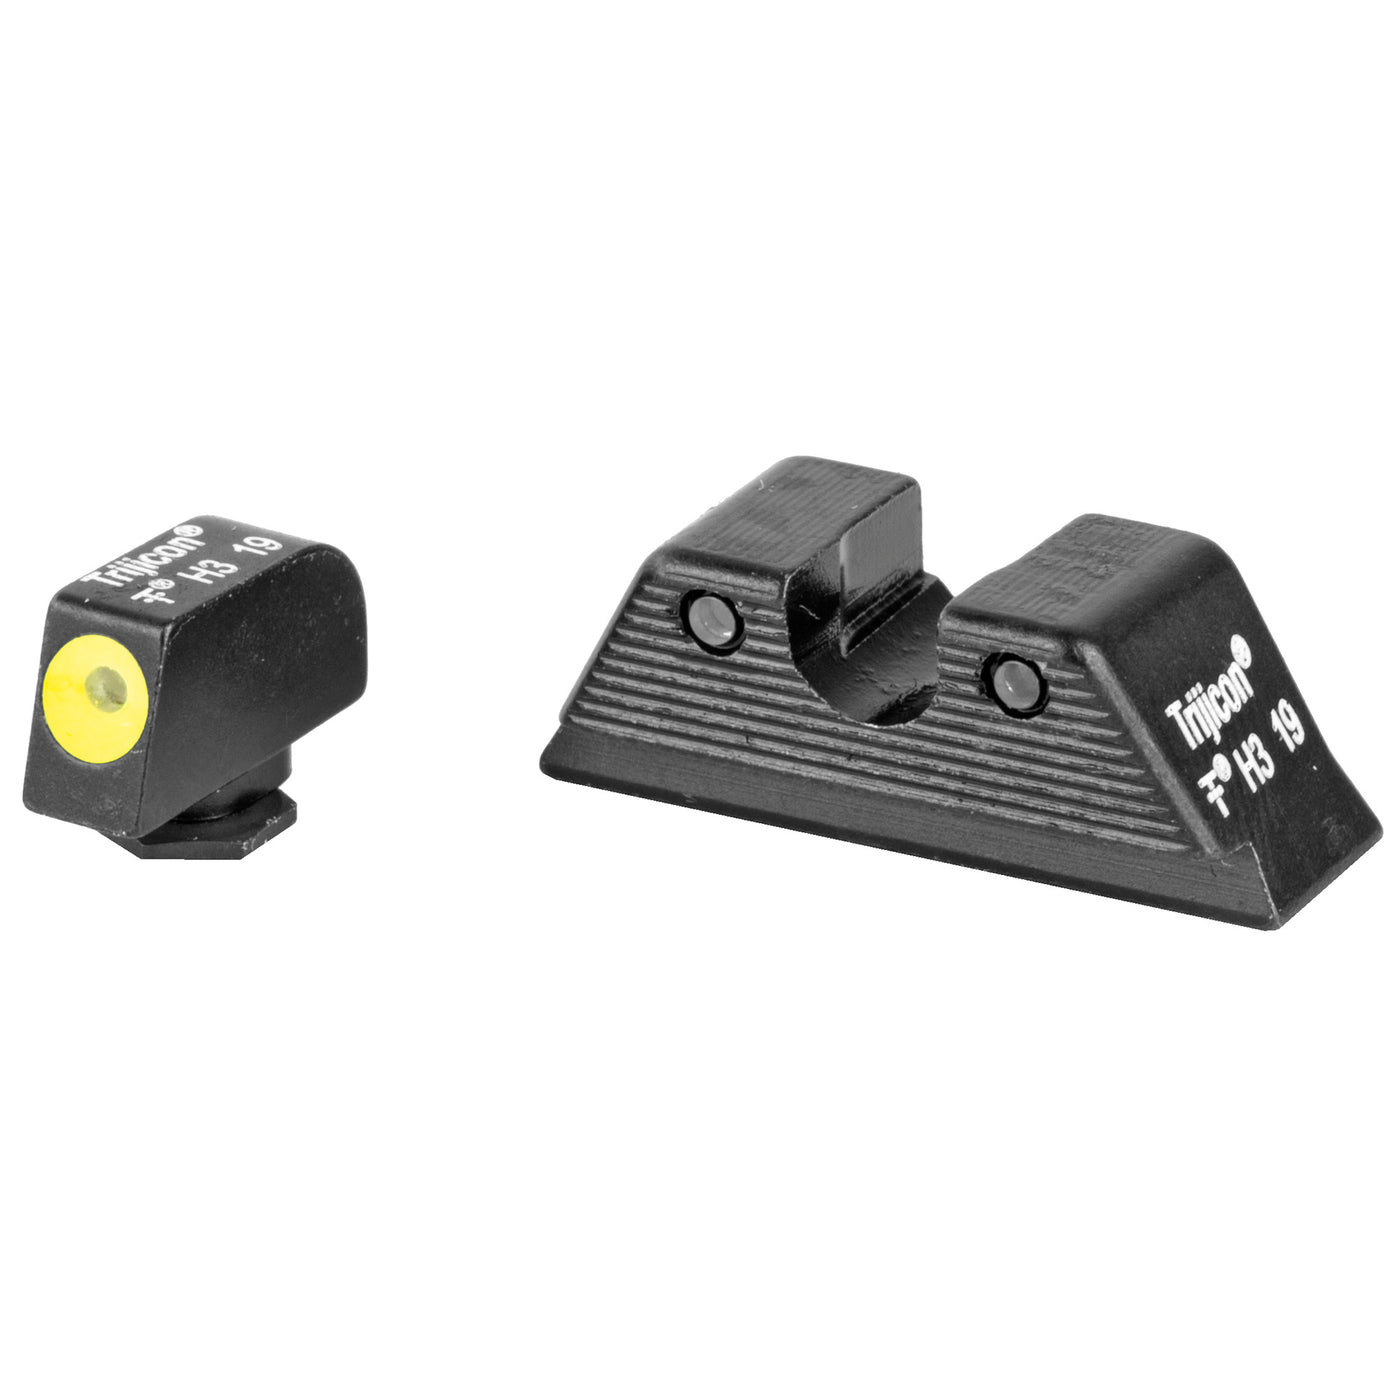 Trijicon Night Sight Set Hd - Yellow Outline For Glock 17mos